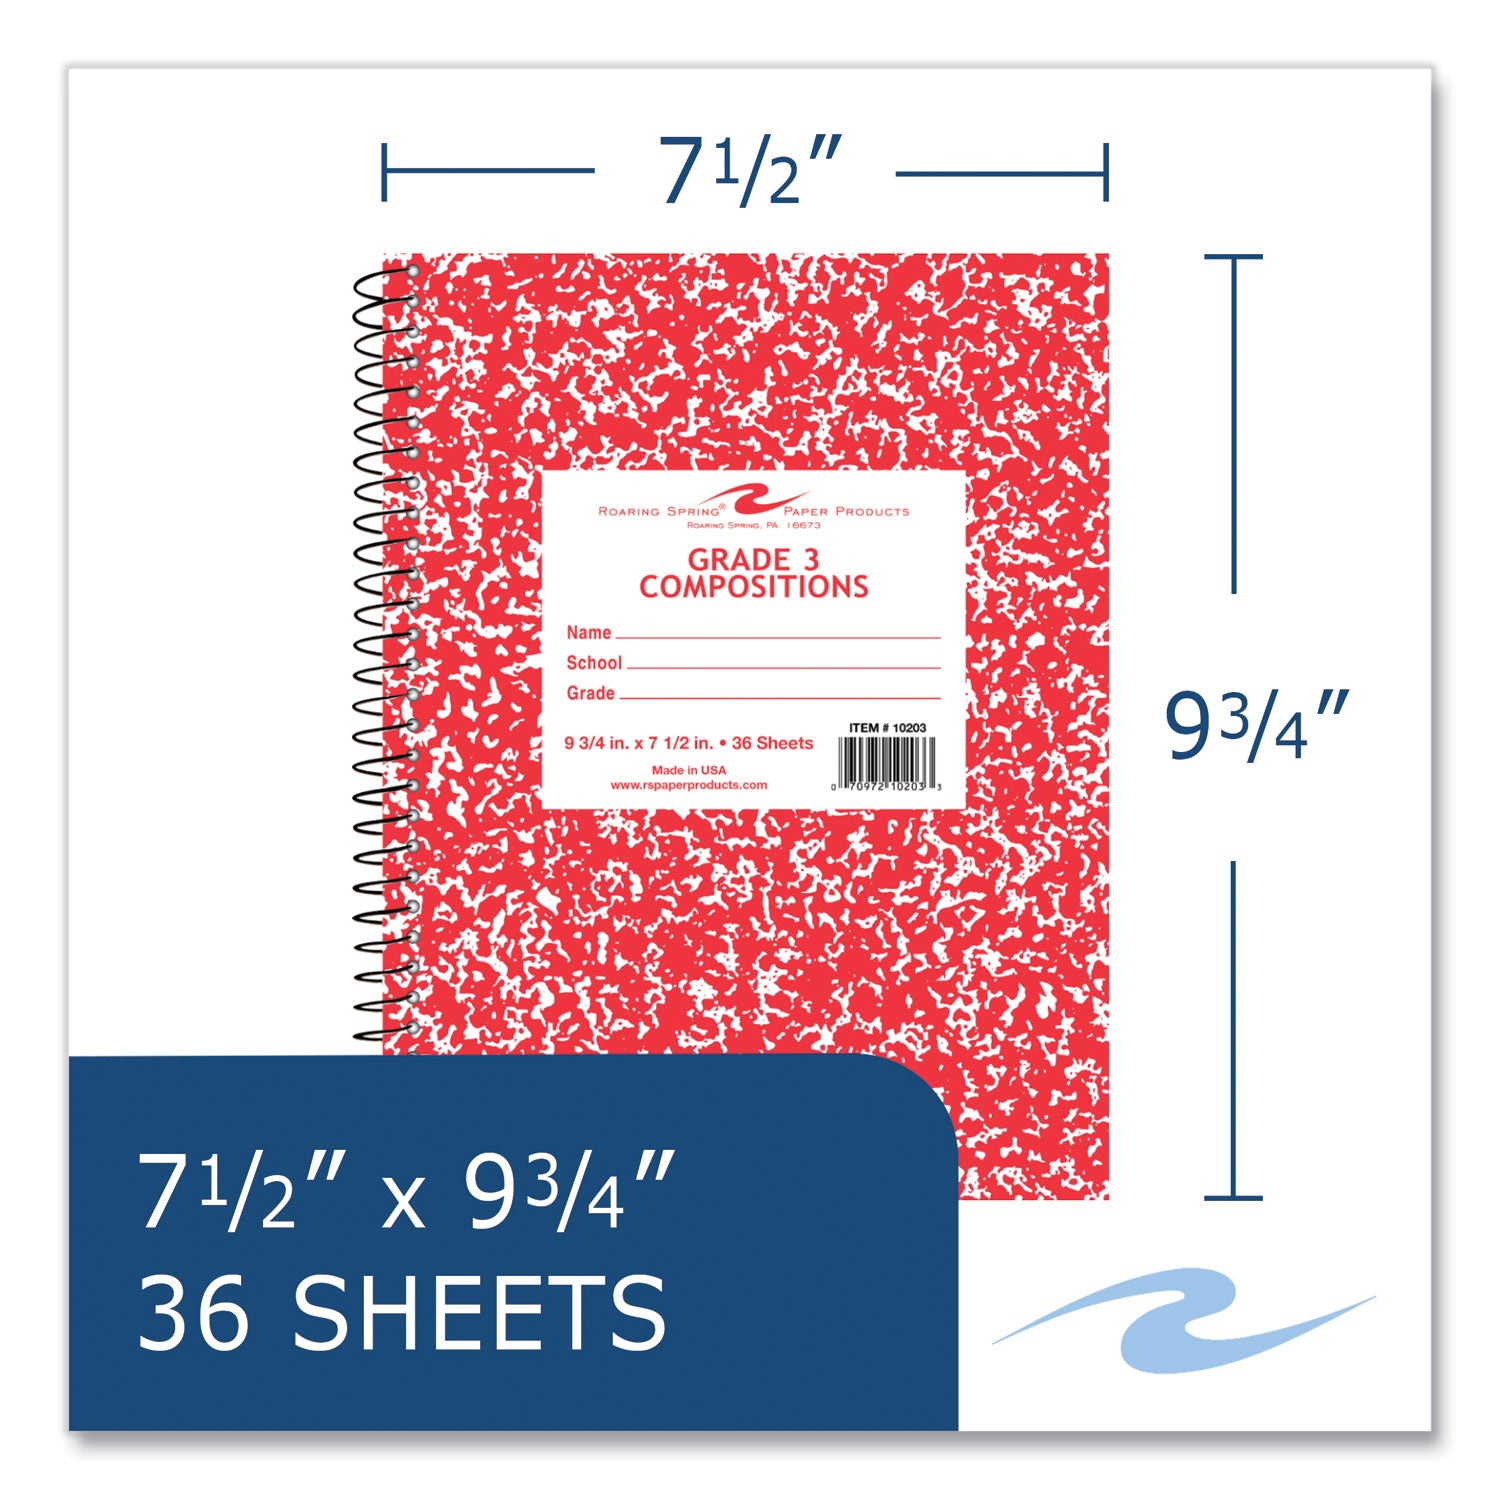 wirebound-composition-book-1-sub-grade-1-manuscript-format-red-cover-36-975-x-75-sheet-48-ct-ships-in-4-6-bus-days_roa10203cs - 4